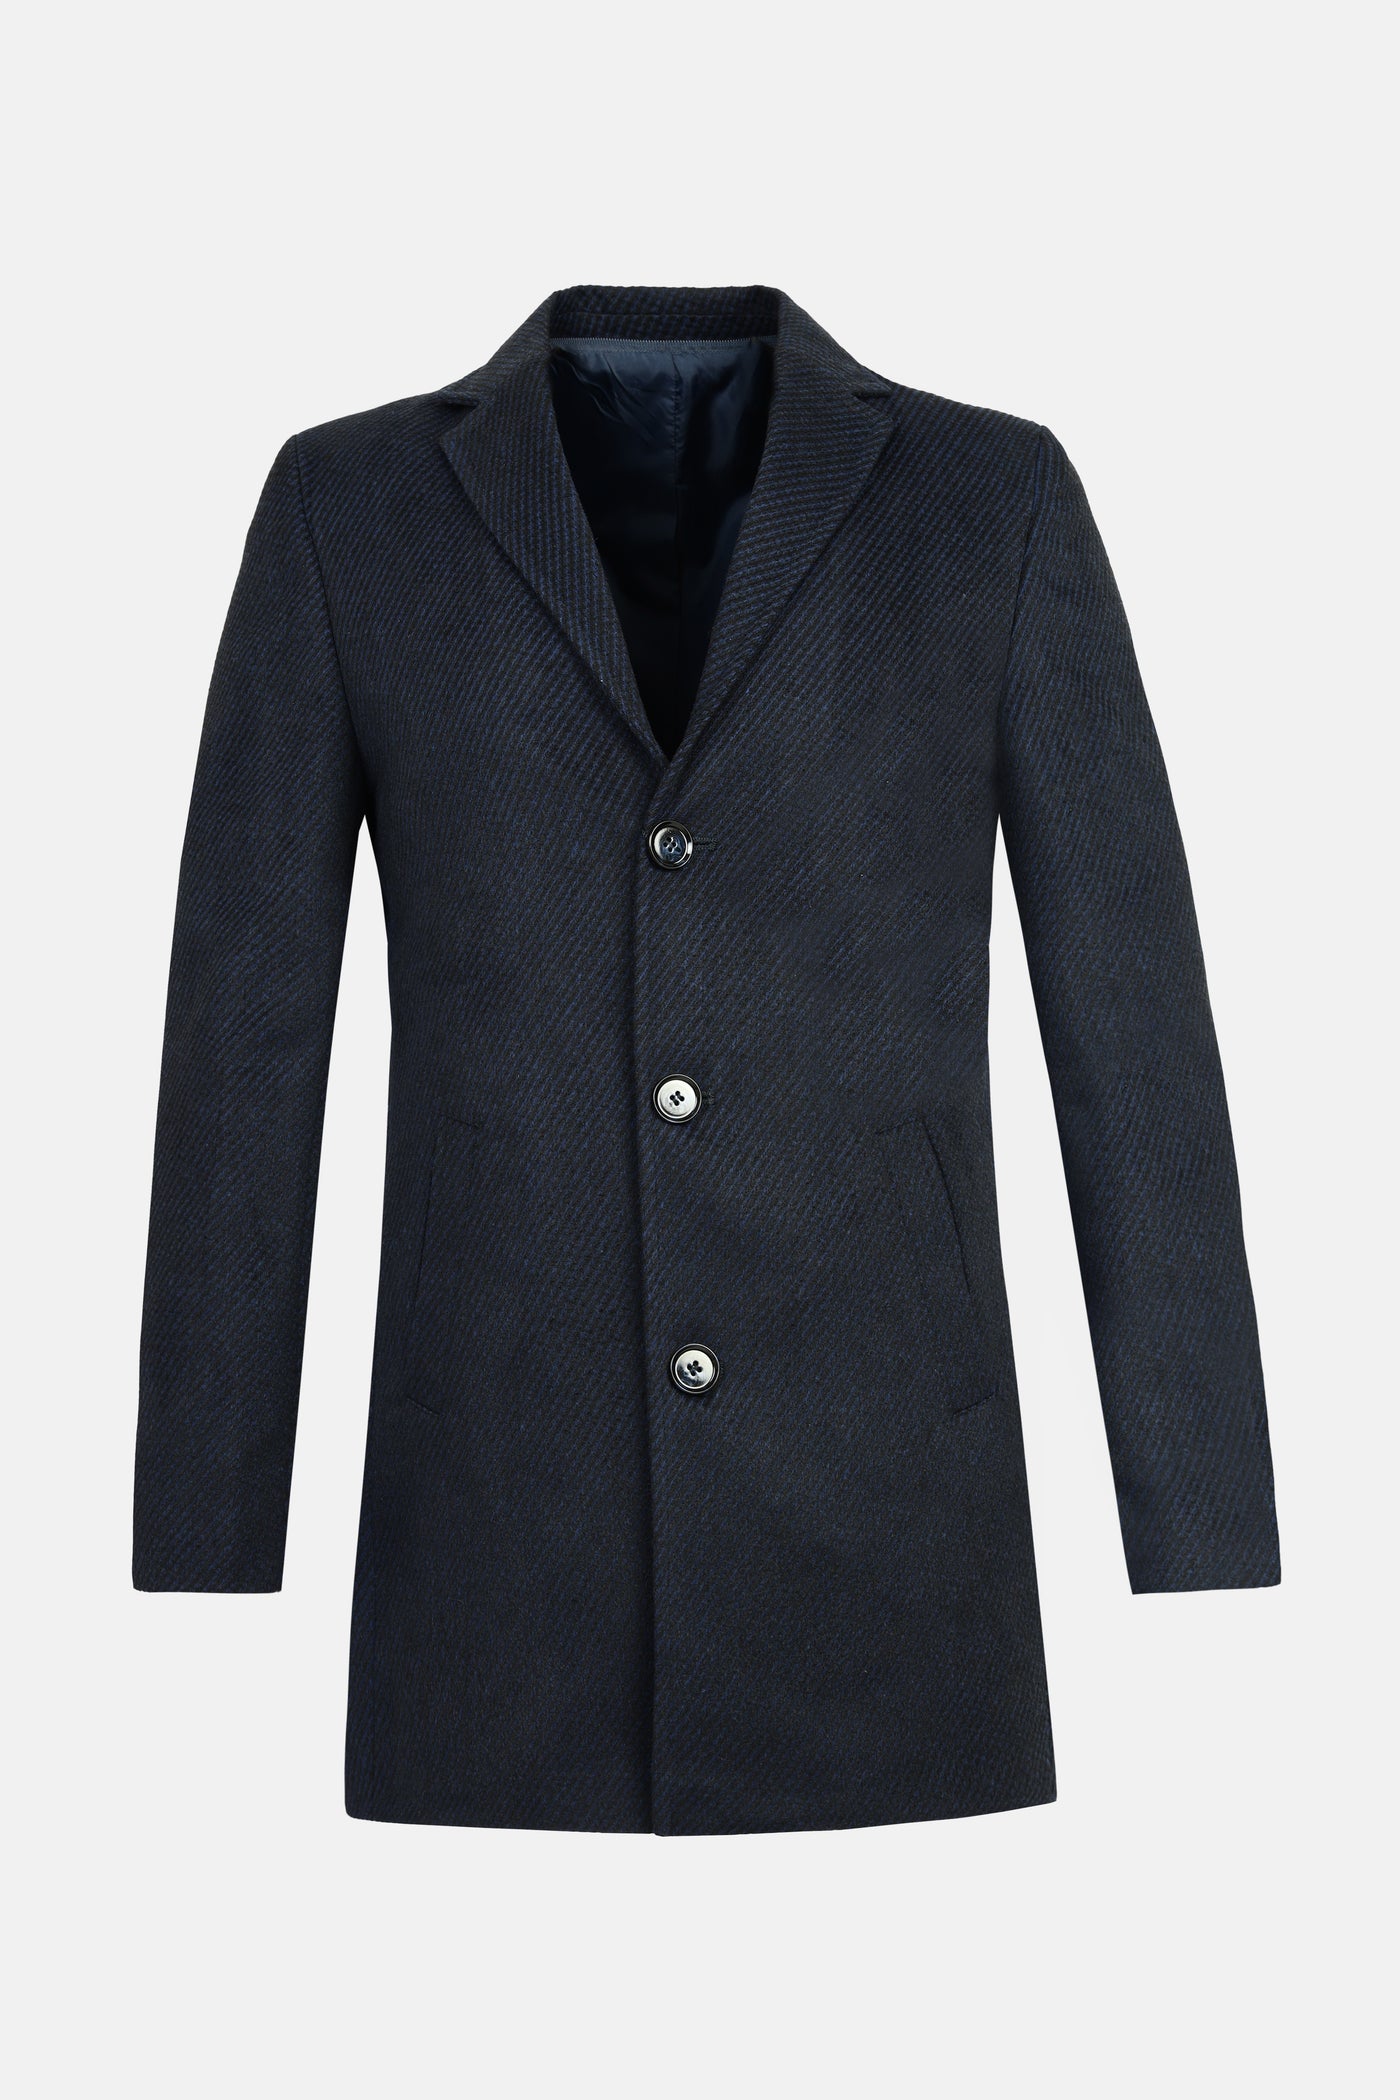 Jacquard Black & Navy Woven wide lapel Coat with removable padded piece